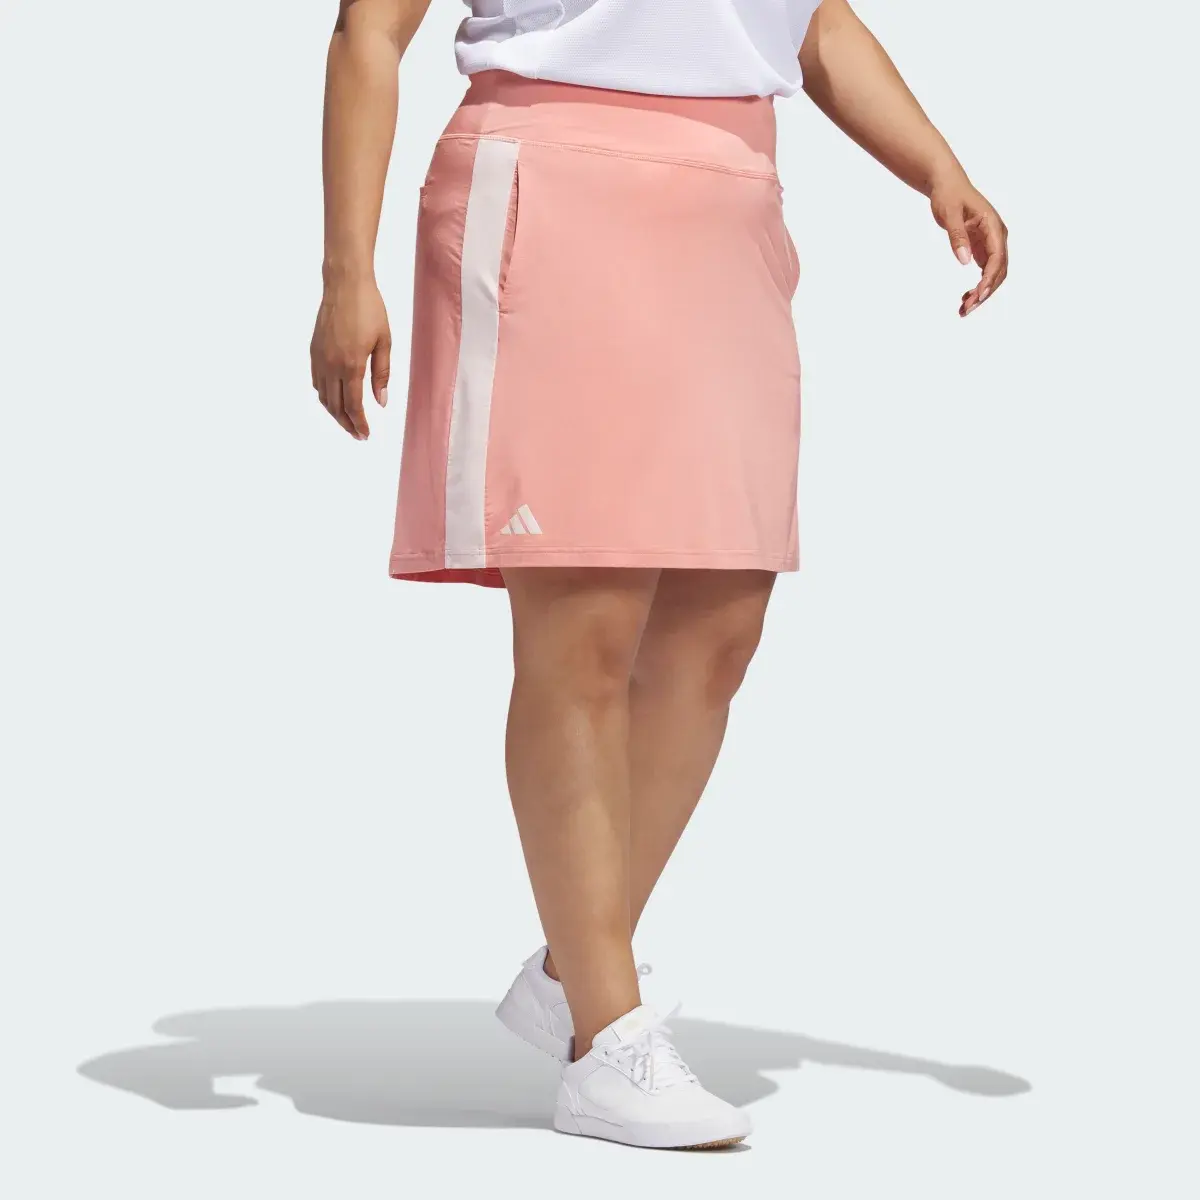 Adidas Made With Nature Golf Skirt (Plus Size). 3